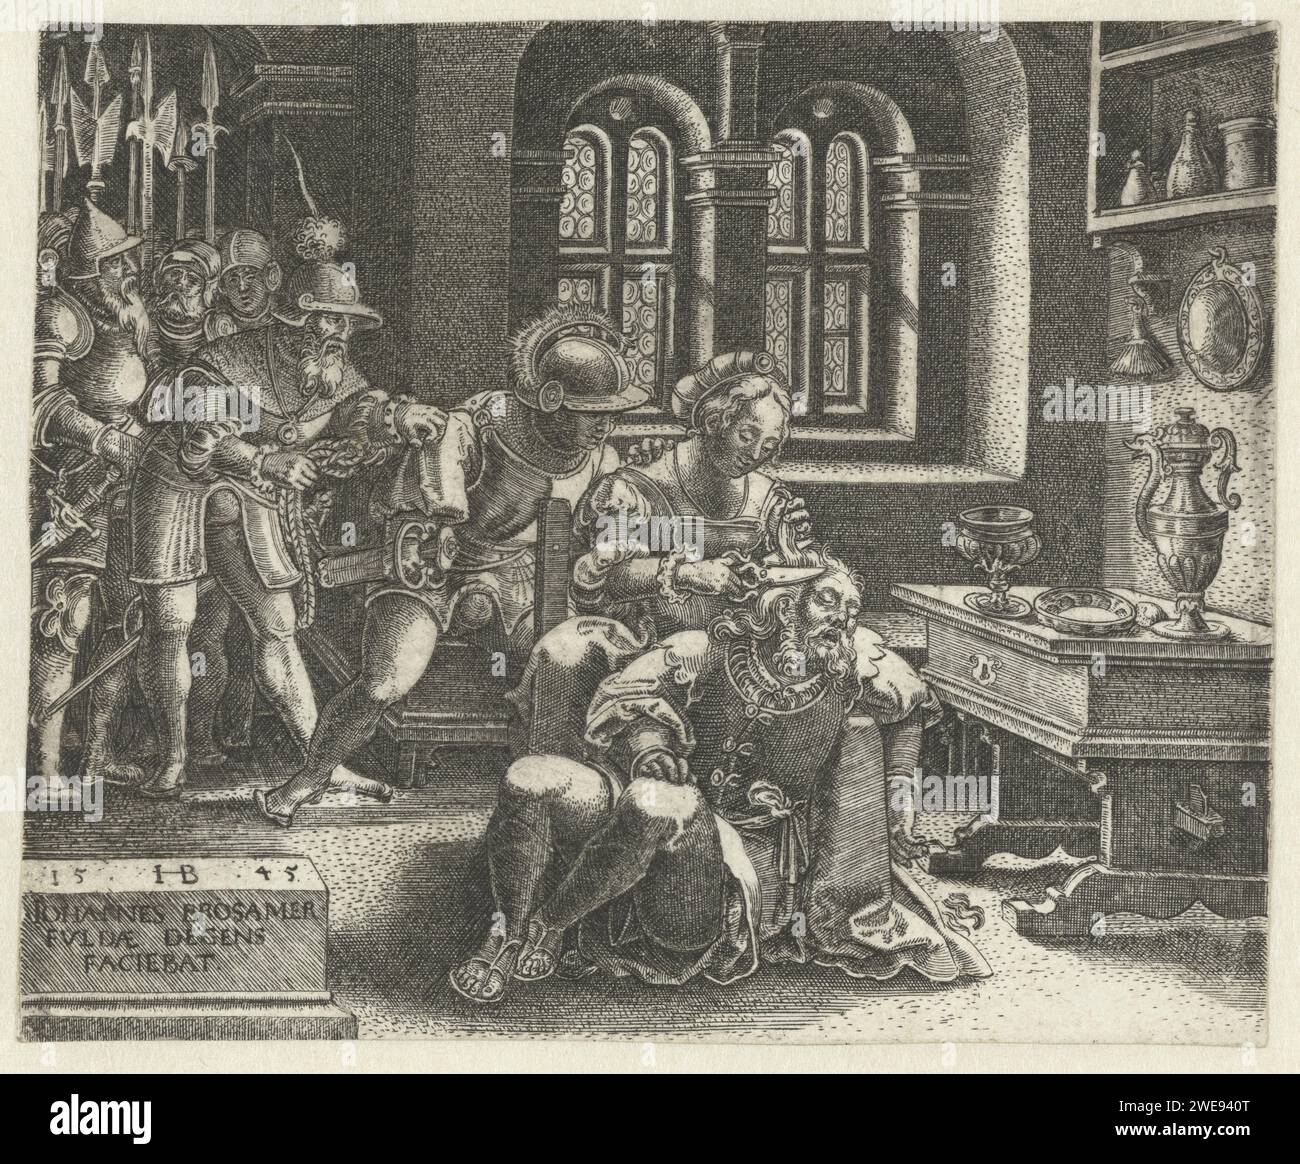 Delila cuts the hair of sleeping Simson (Samson) while Philistines wait, Hans Brosamer, 1545 print  Fulda paper engraving Samson asleep in Delilah's lap; she is usually shown beckoning to a Philistine or putting a finger to her lips Stock Photo